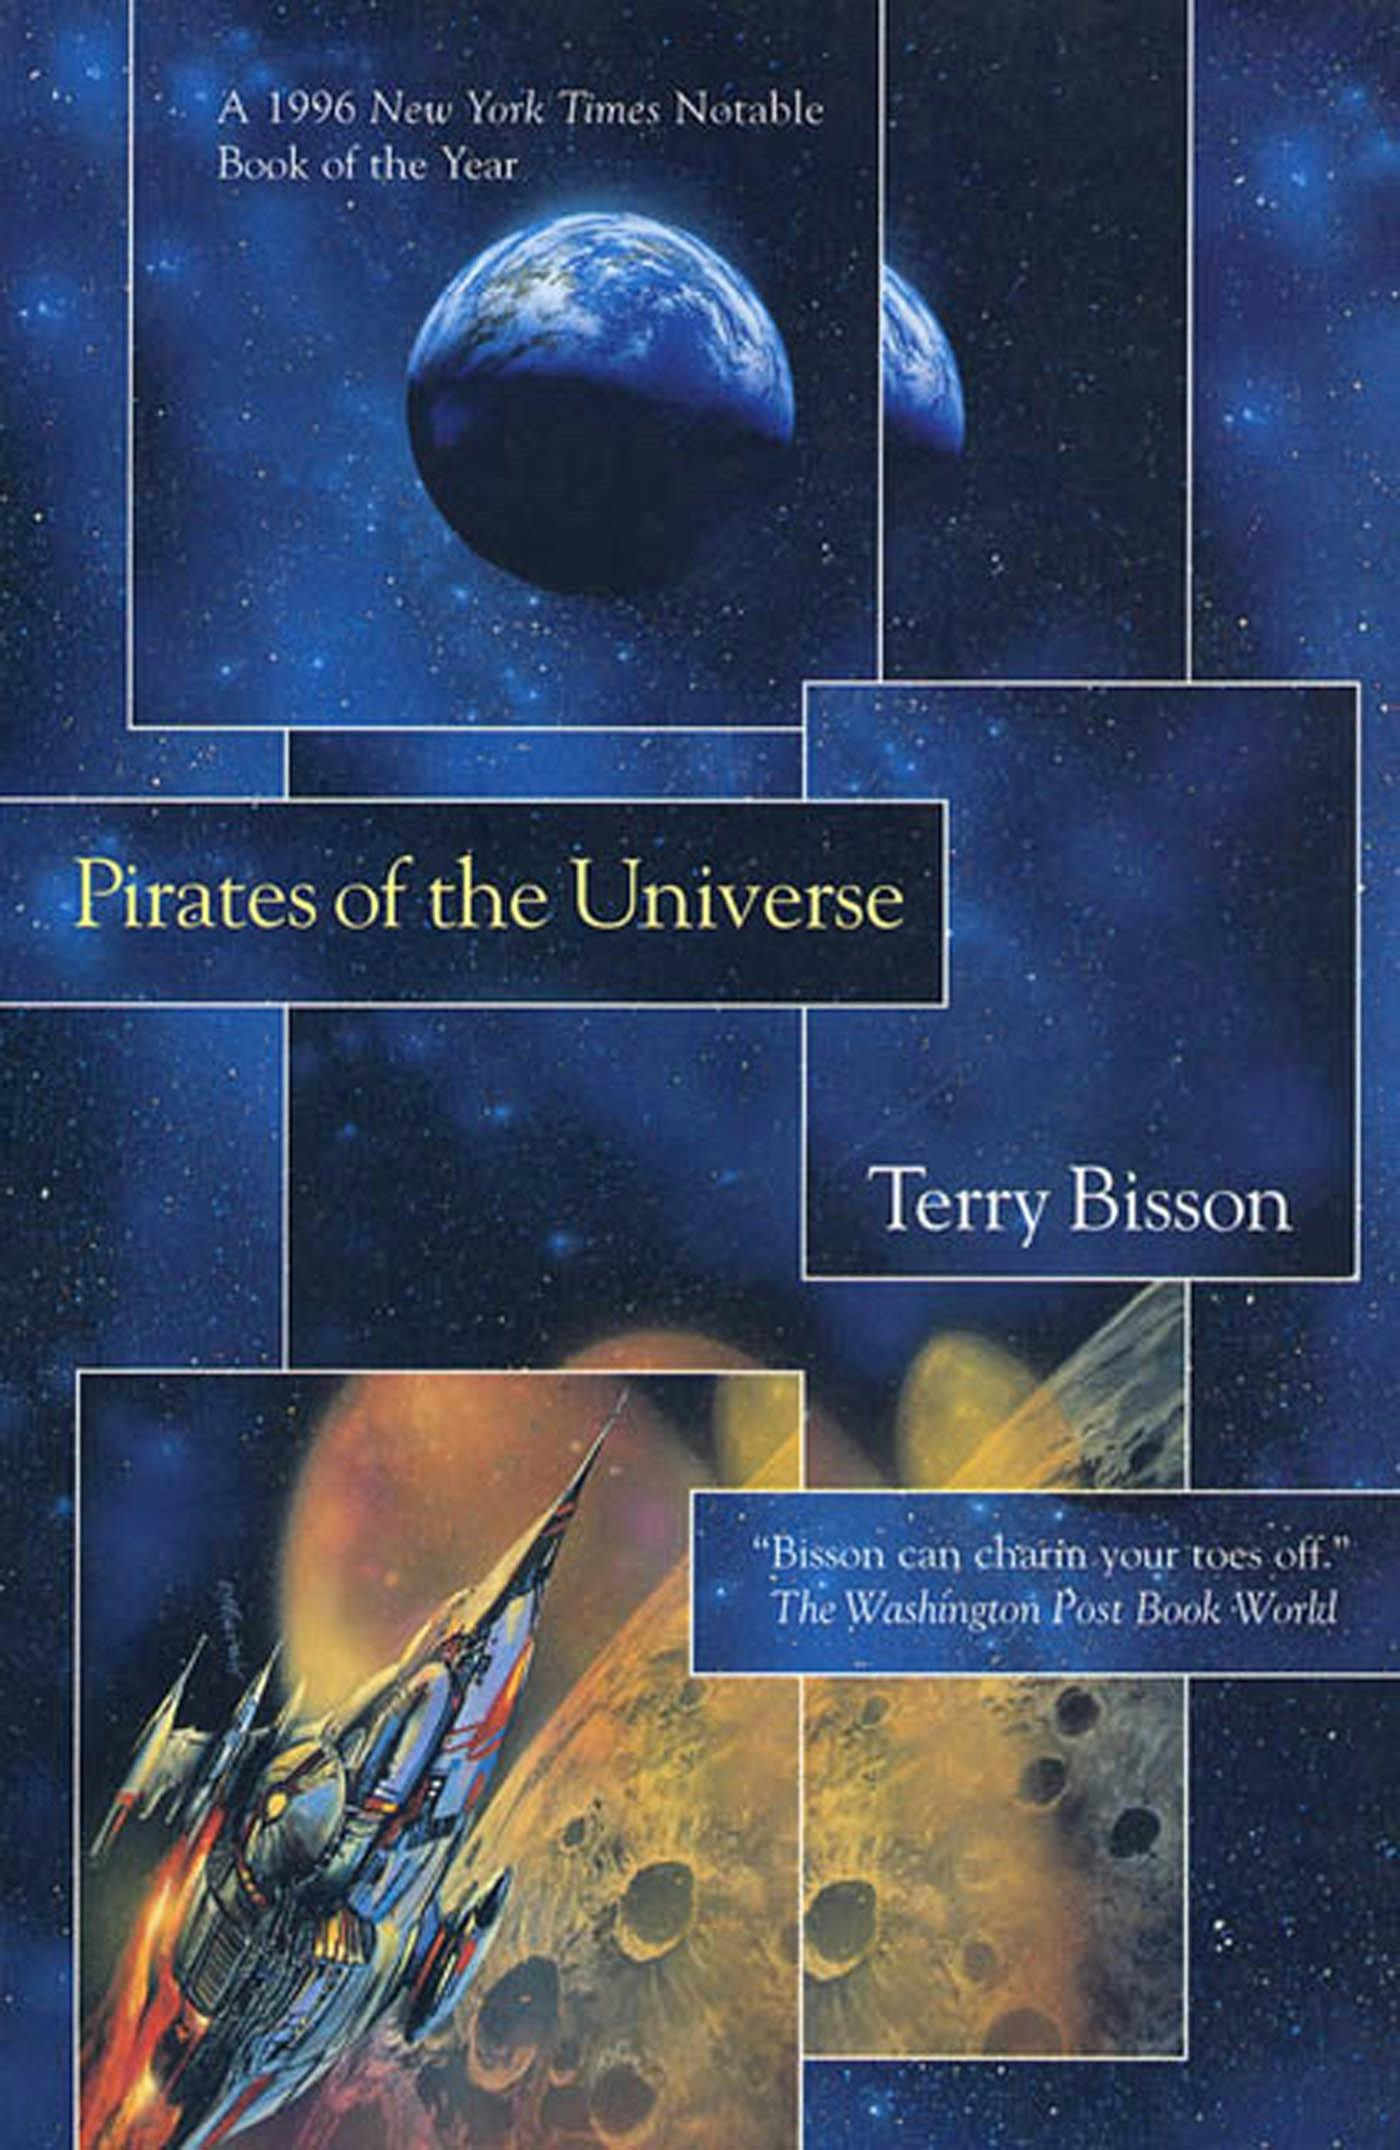 Cover for the book titled as: Pirates of the Universe